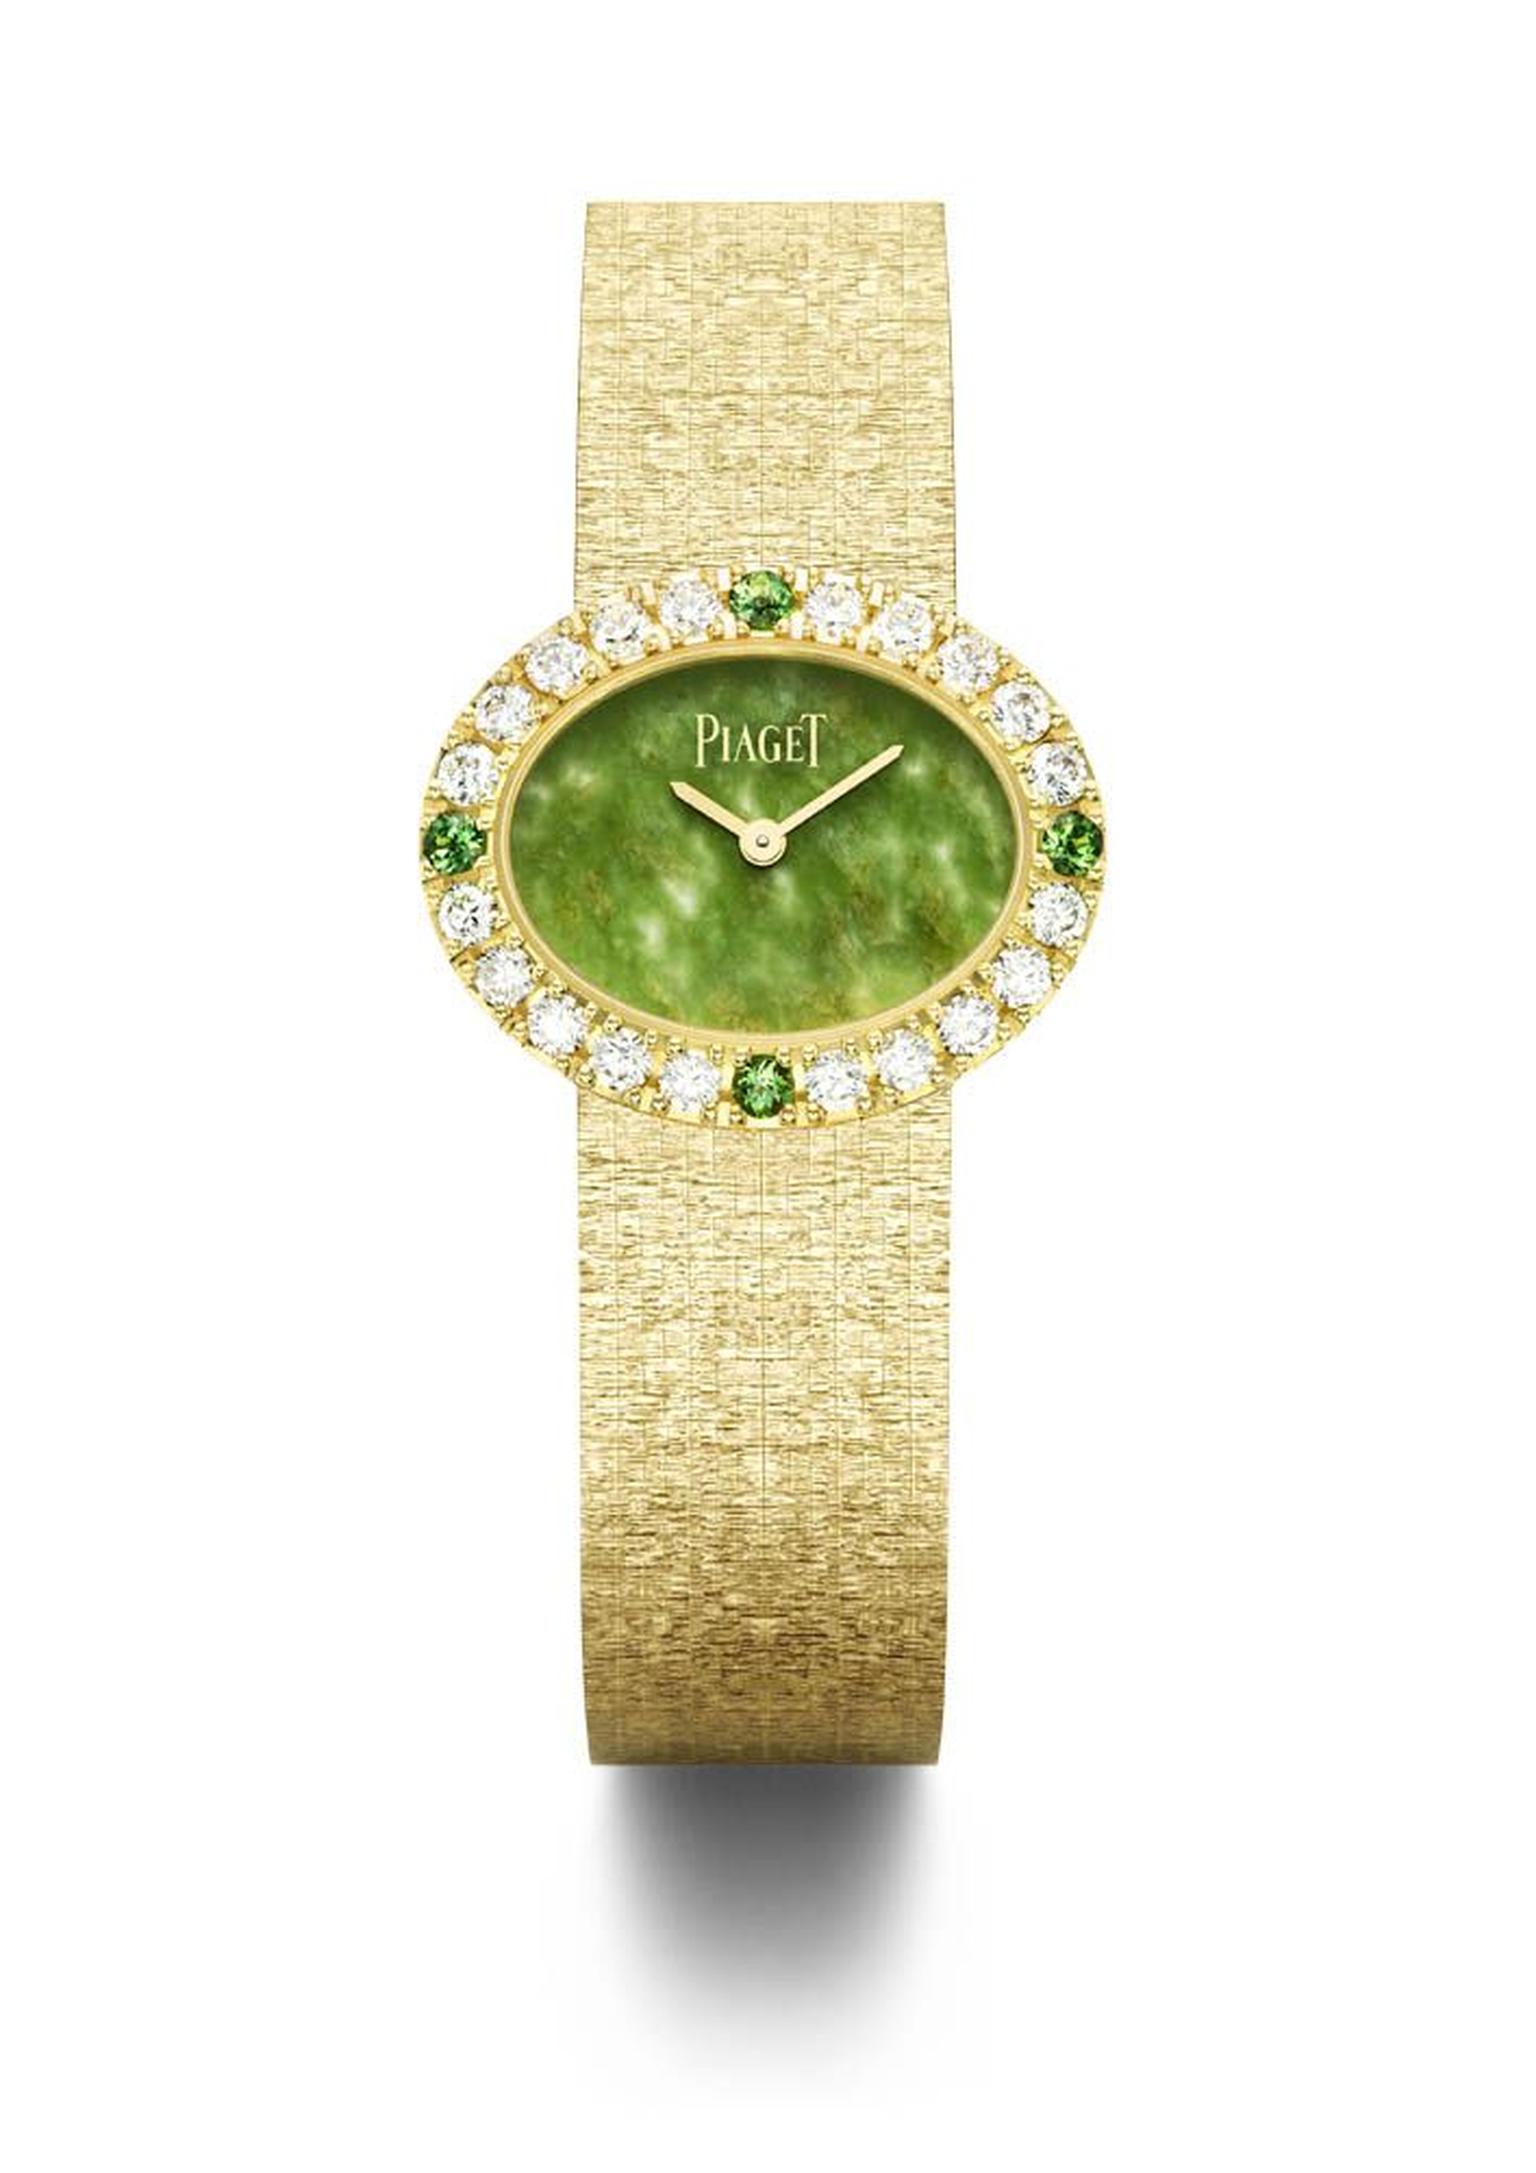 Piaget has chosen an iconic oval-shaped model from the 1960s with a jade dial and a bezel set with diamonds and emeralds as its muse for the two Traditional Oval watches it will be unveiling next year.